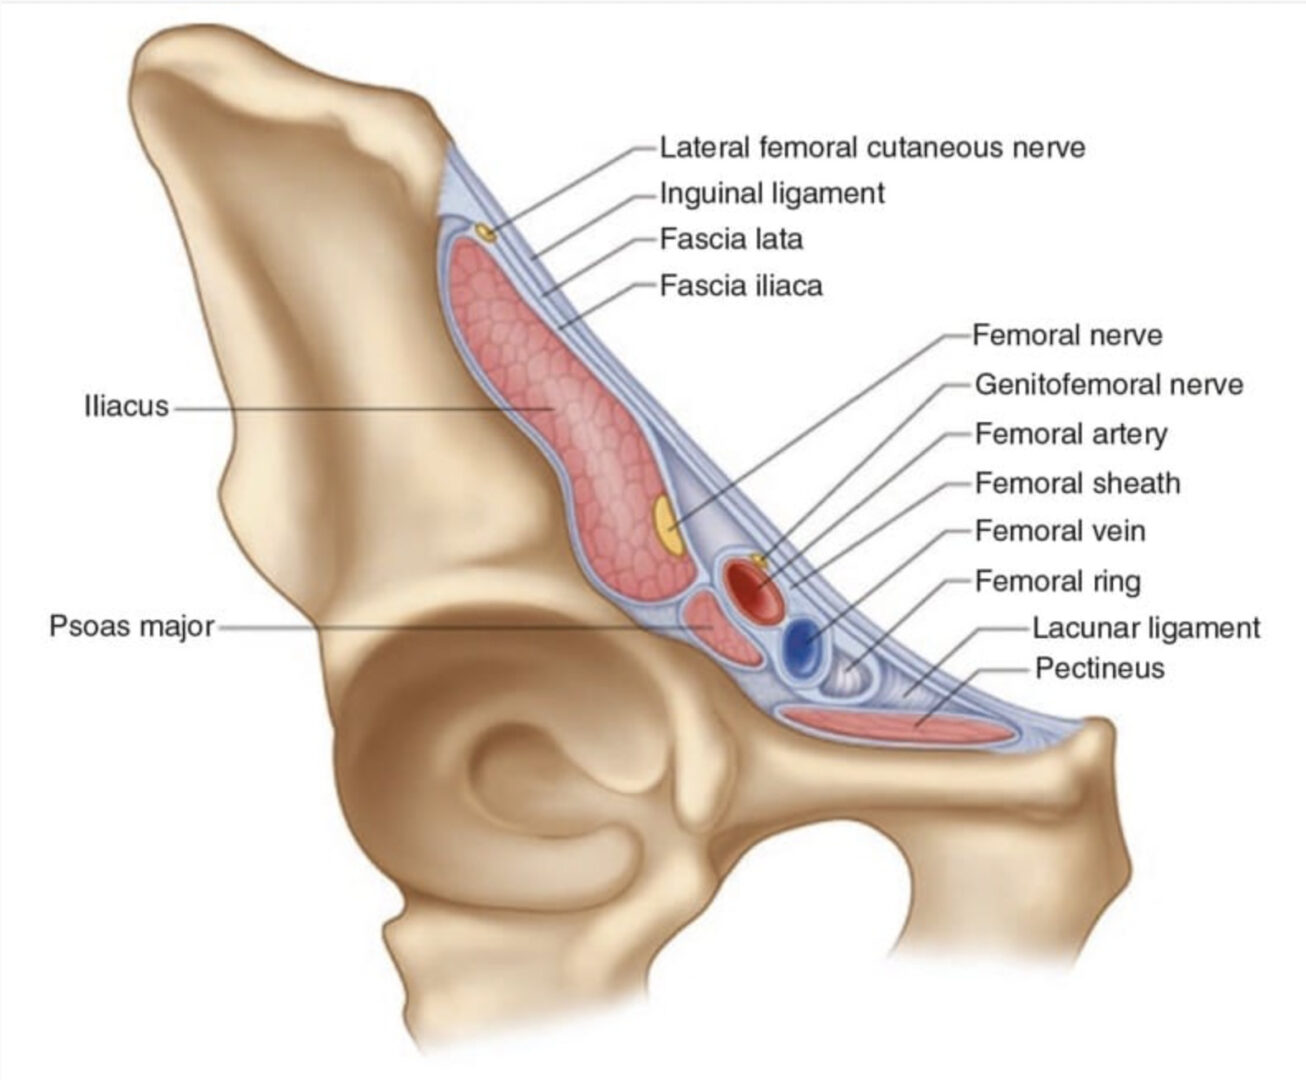 lateral femoral cutaneous nerve dermatome